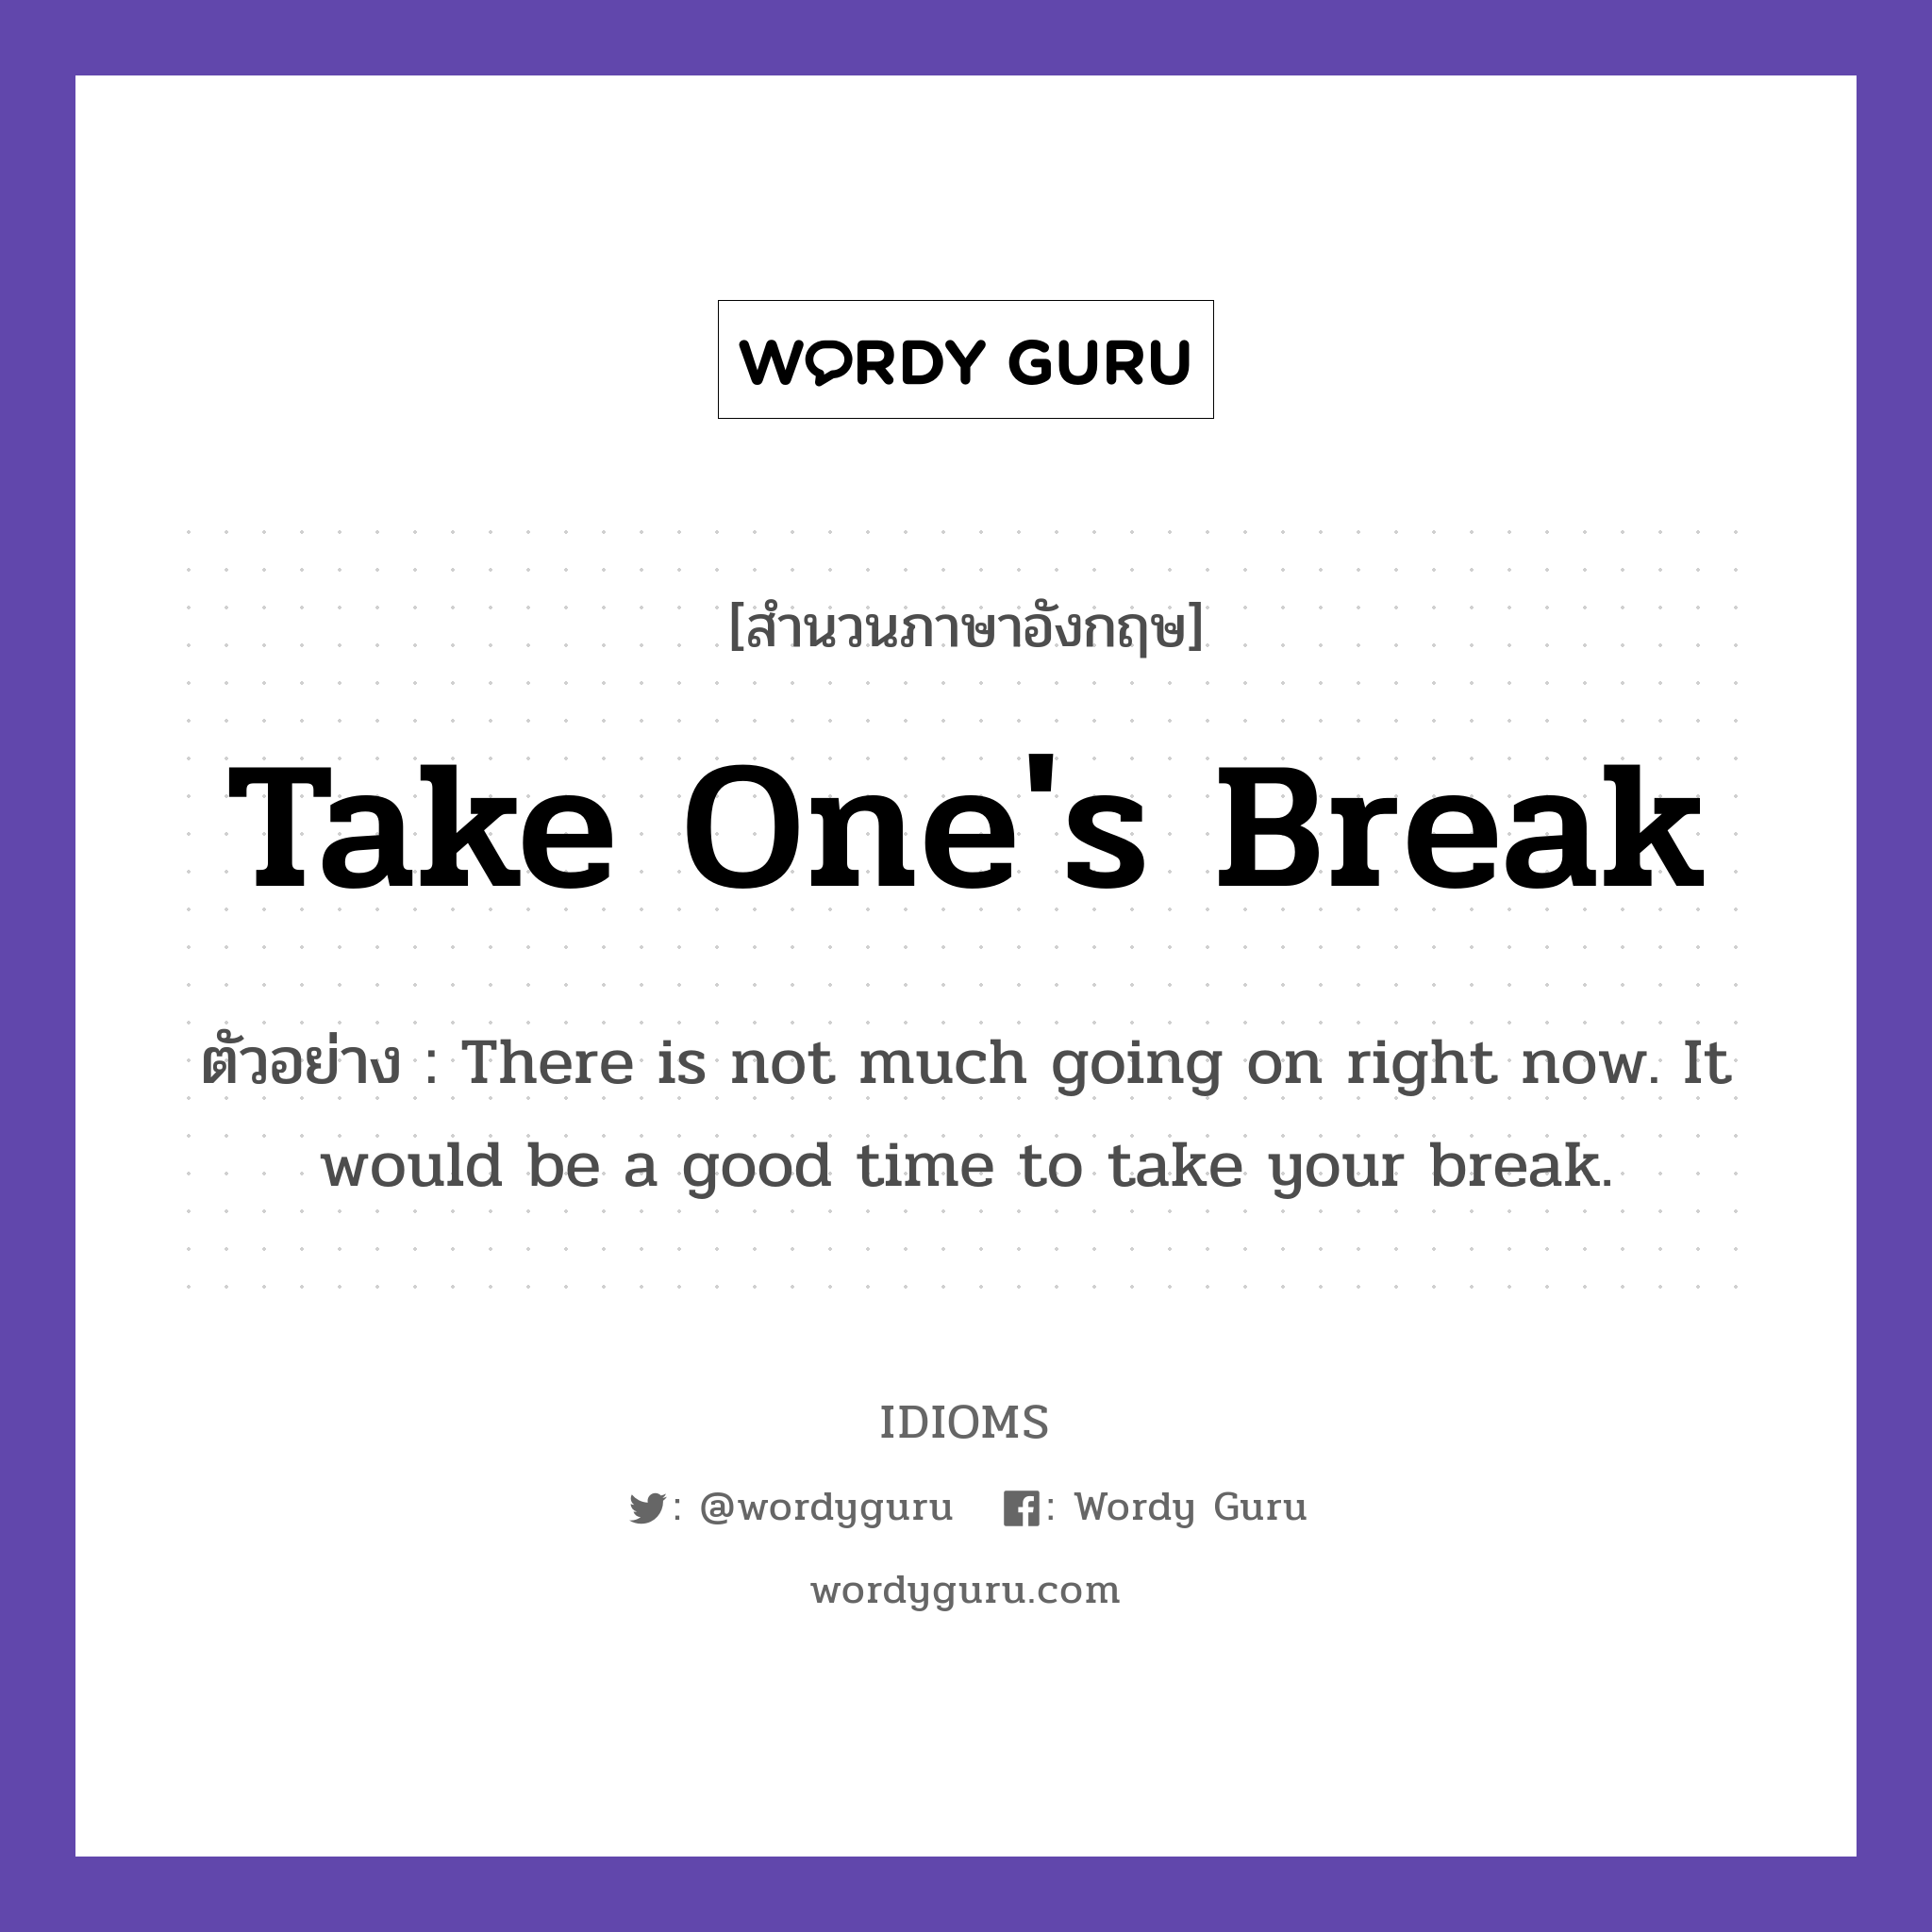 Take One's Break แปลว่า?, สำนวนภาษาอังกฤษ Take One's Break ตัวอย่าง There is not much going on right now. It would be a good time to take your break.